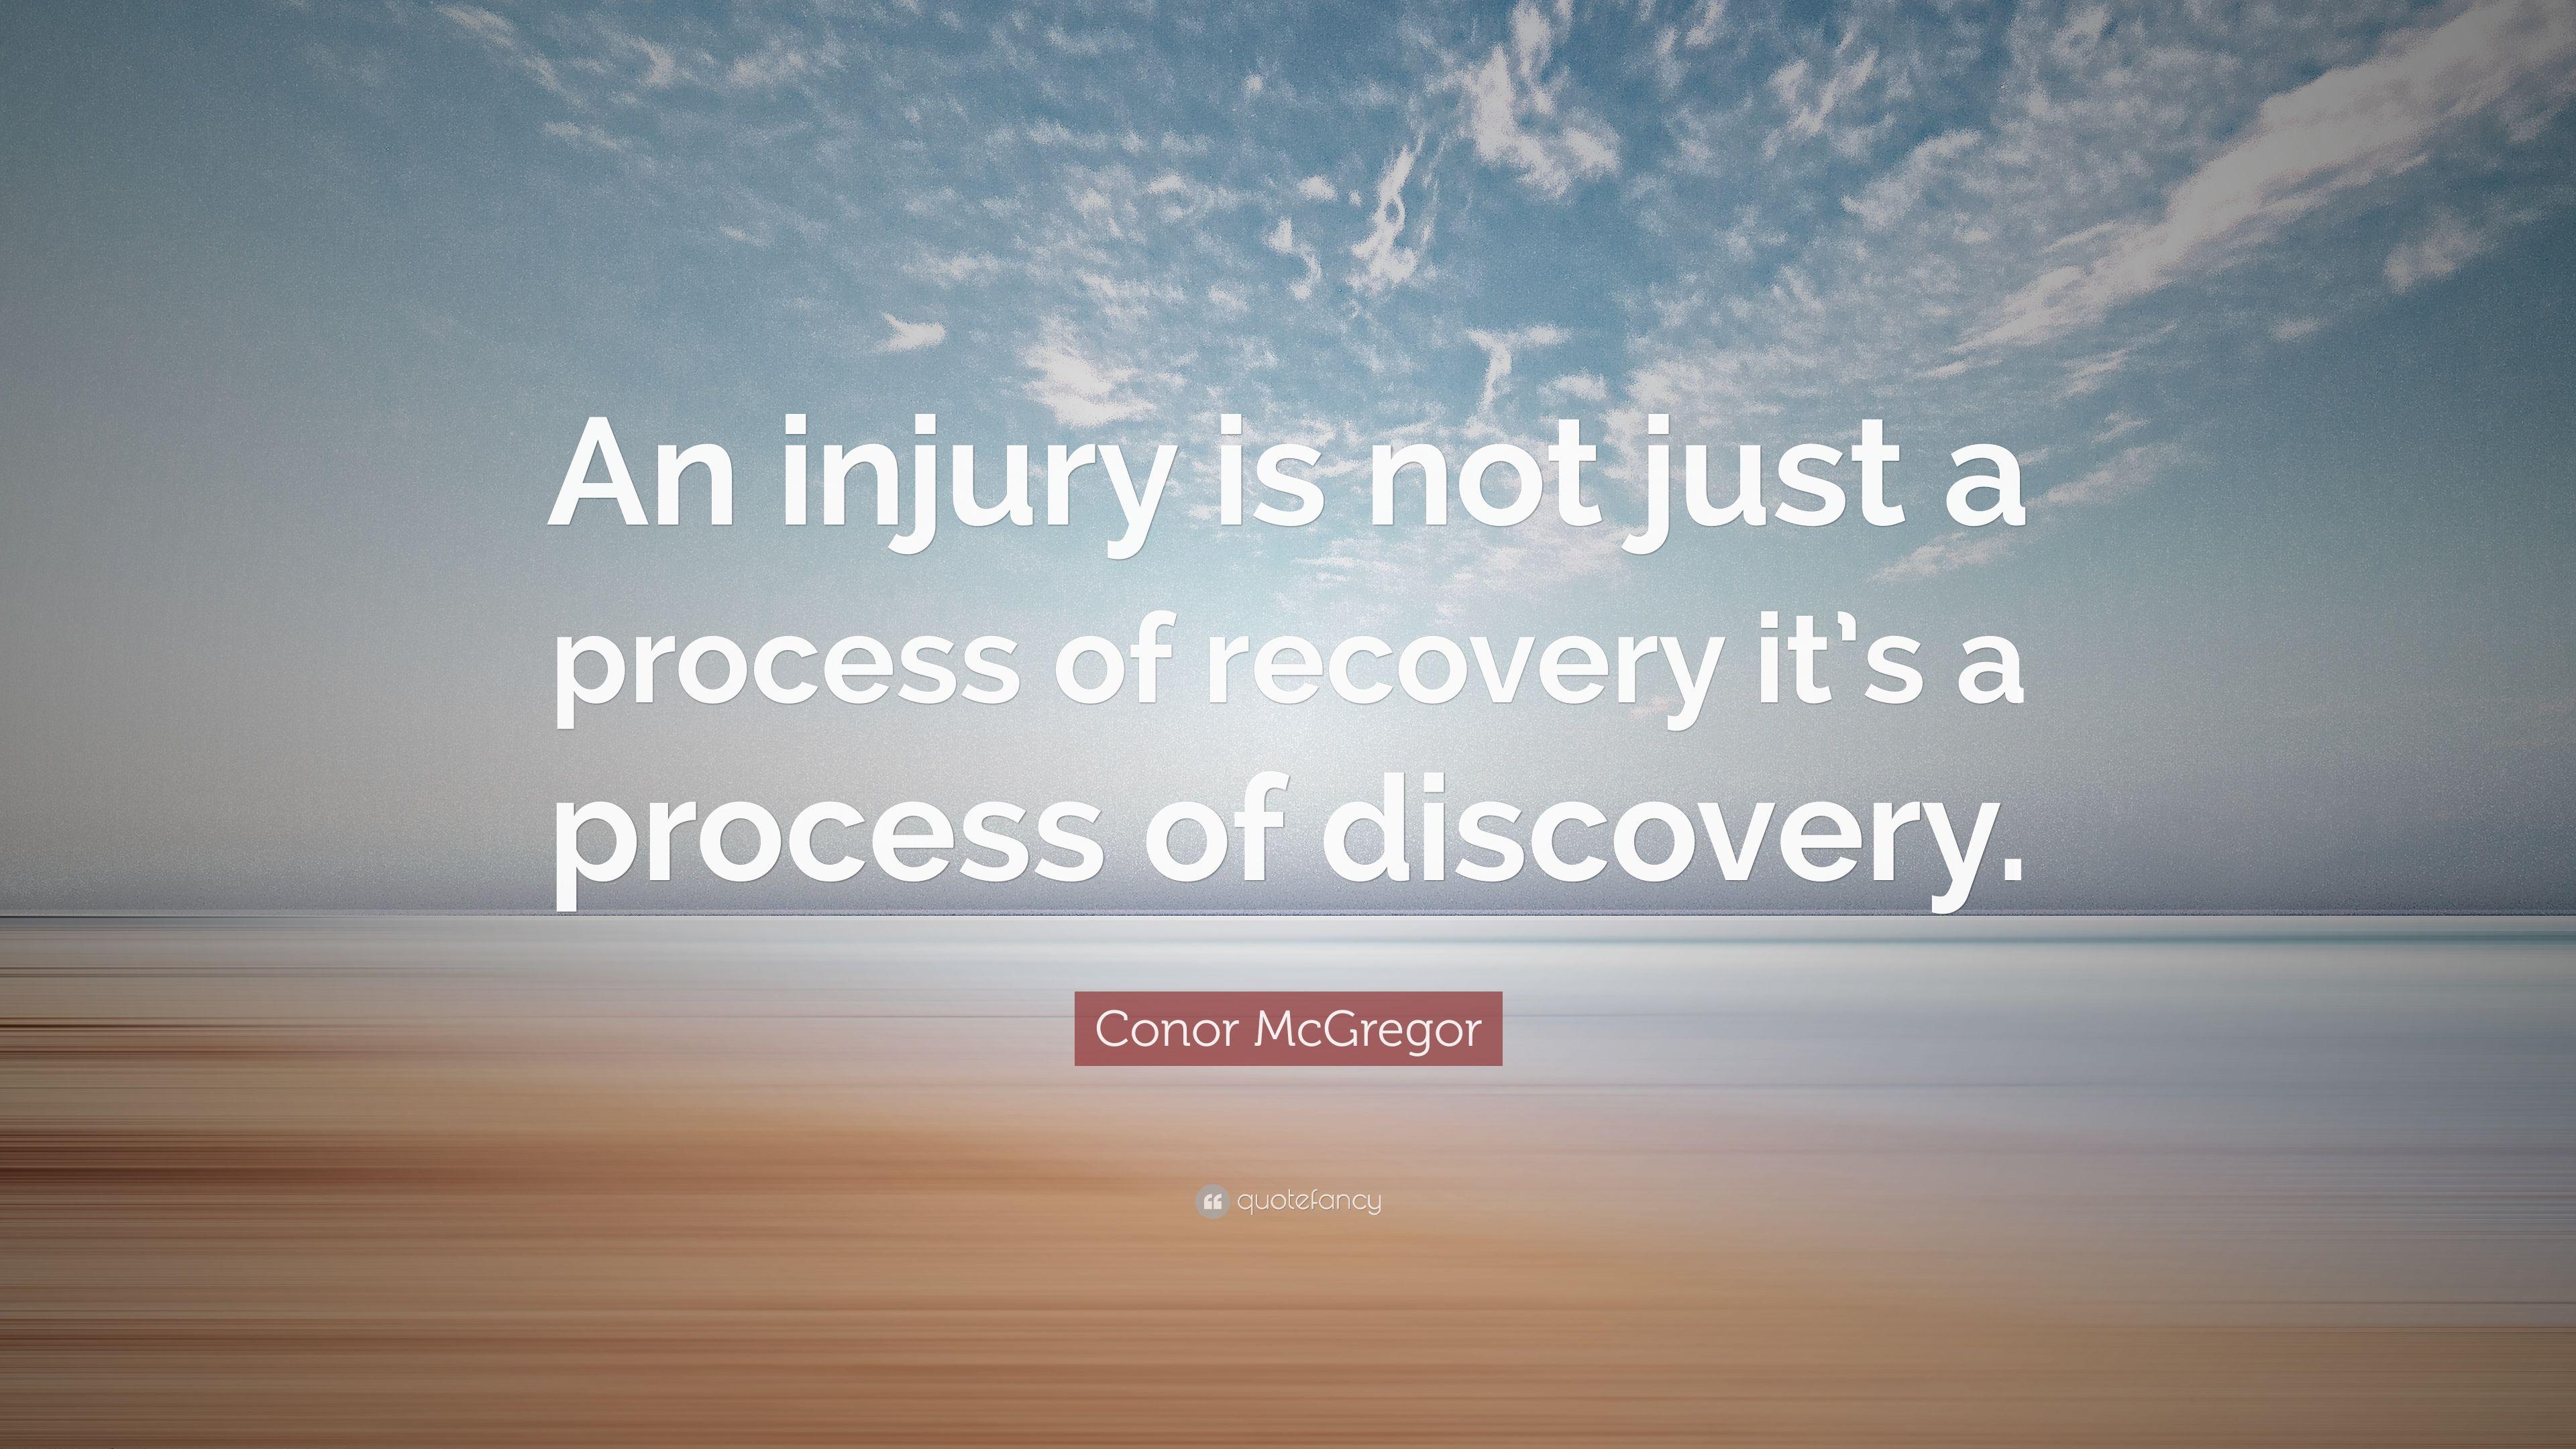 Conor McGregor Quote: “An injury is not just a process of recovery